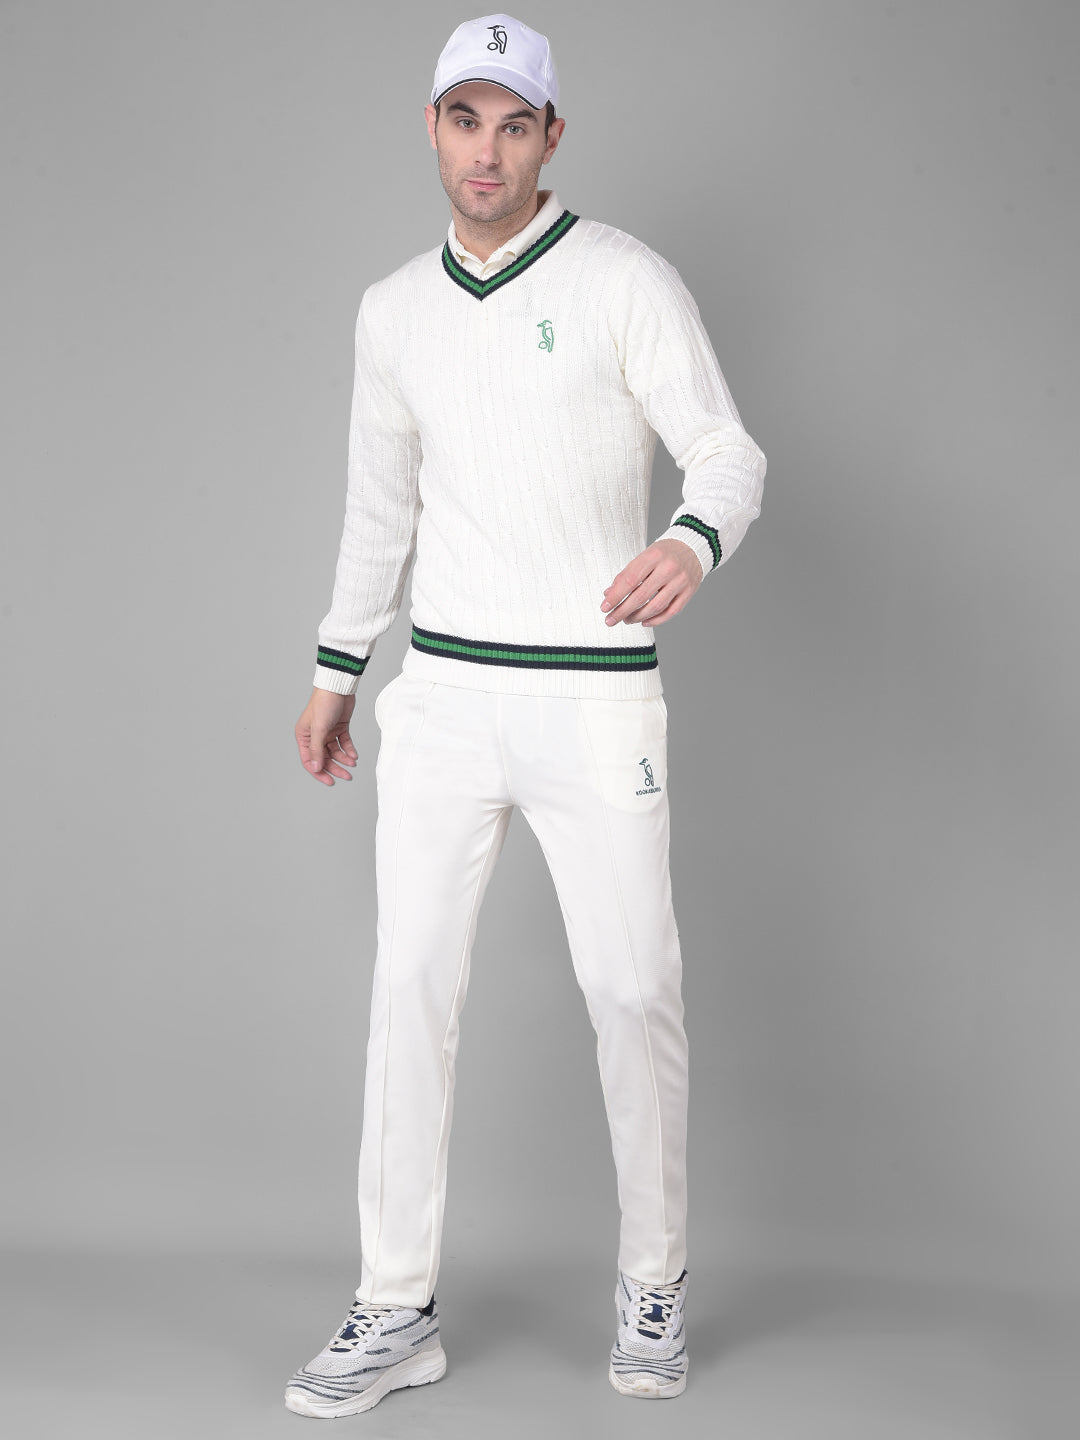 Kookaburra Players Full Sleev Sweater for Unmatched Cricket Style and Comfort